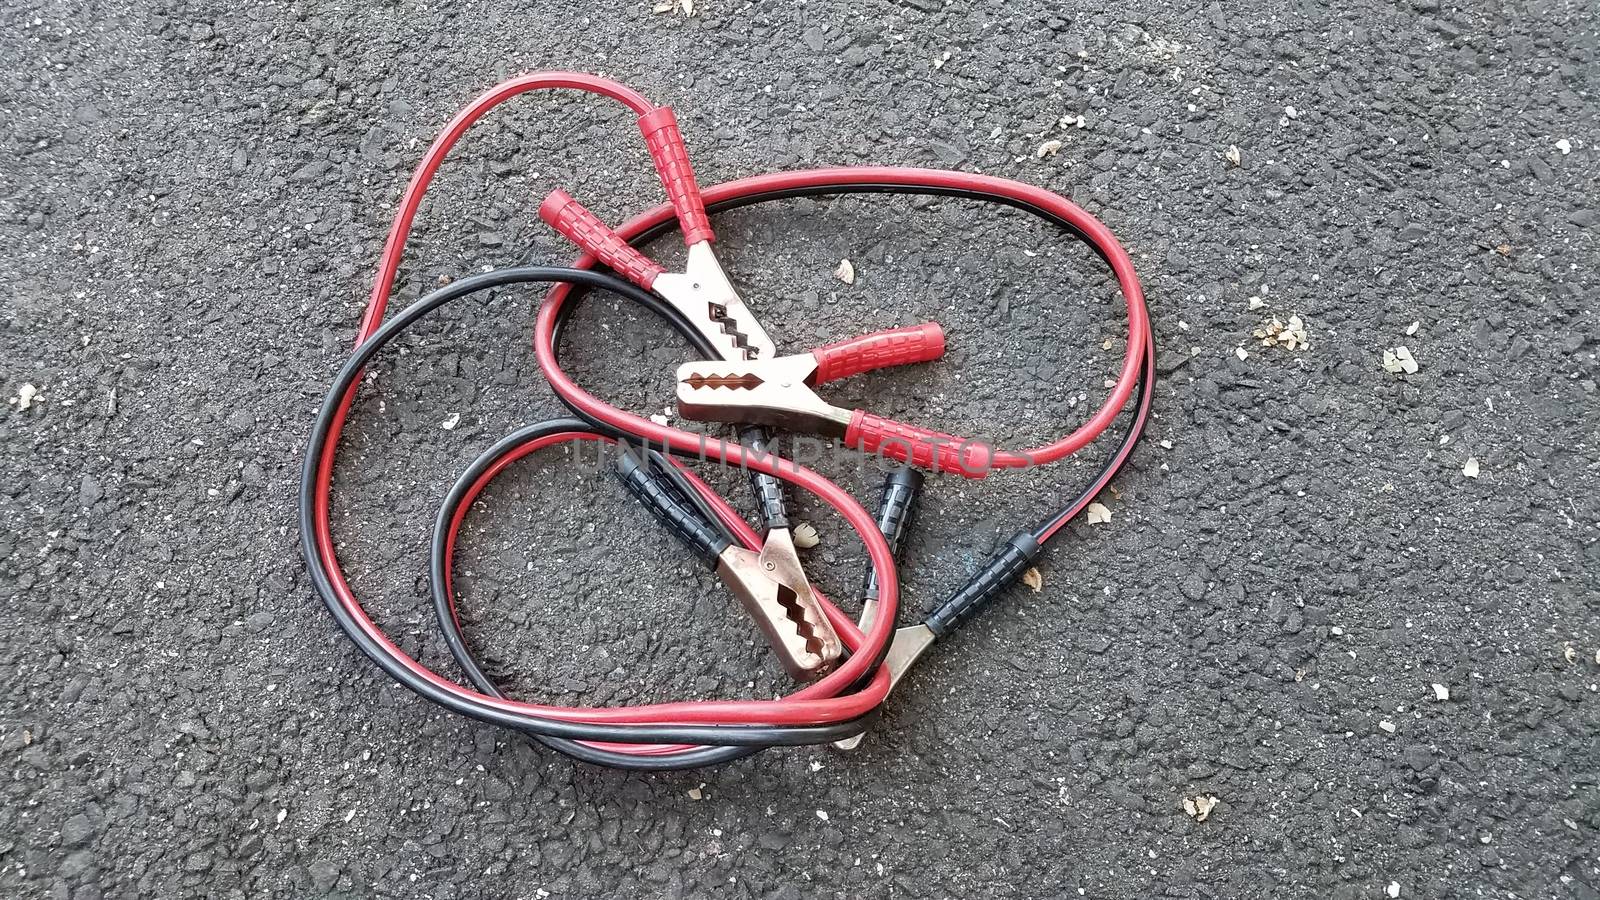 red and black jumper cables on ground by stockphotofan1